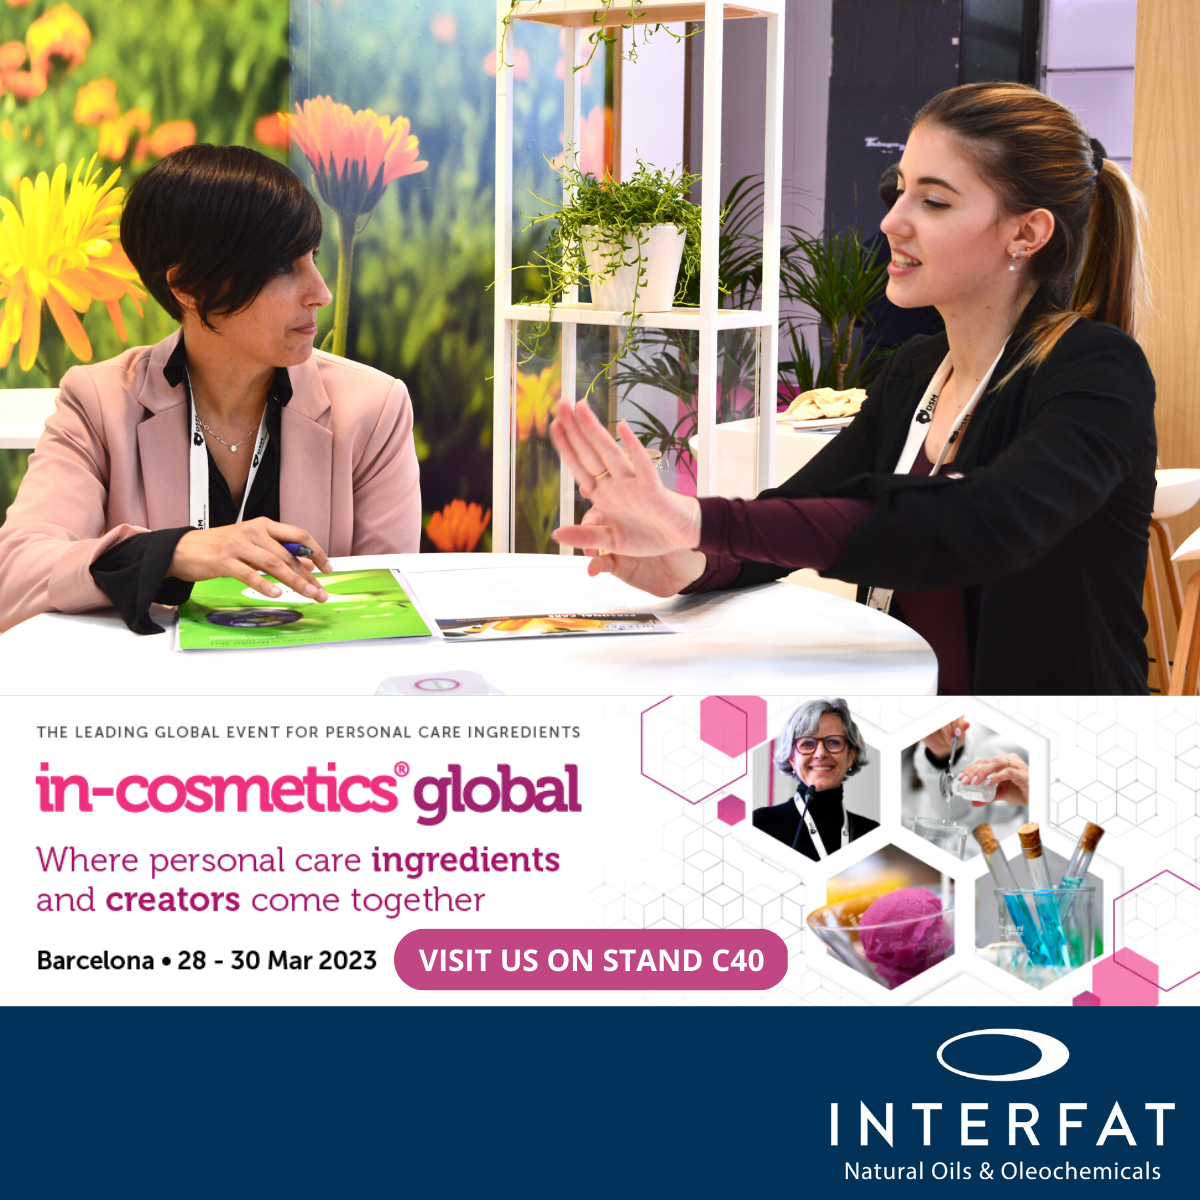 Interfat will be exhibiting at In-Cosmetics Global 2023